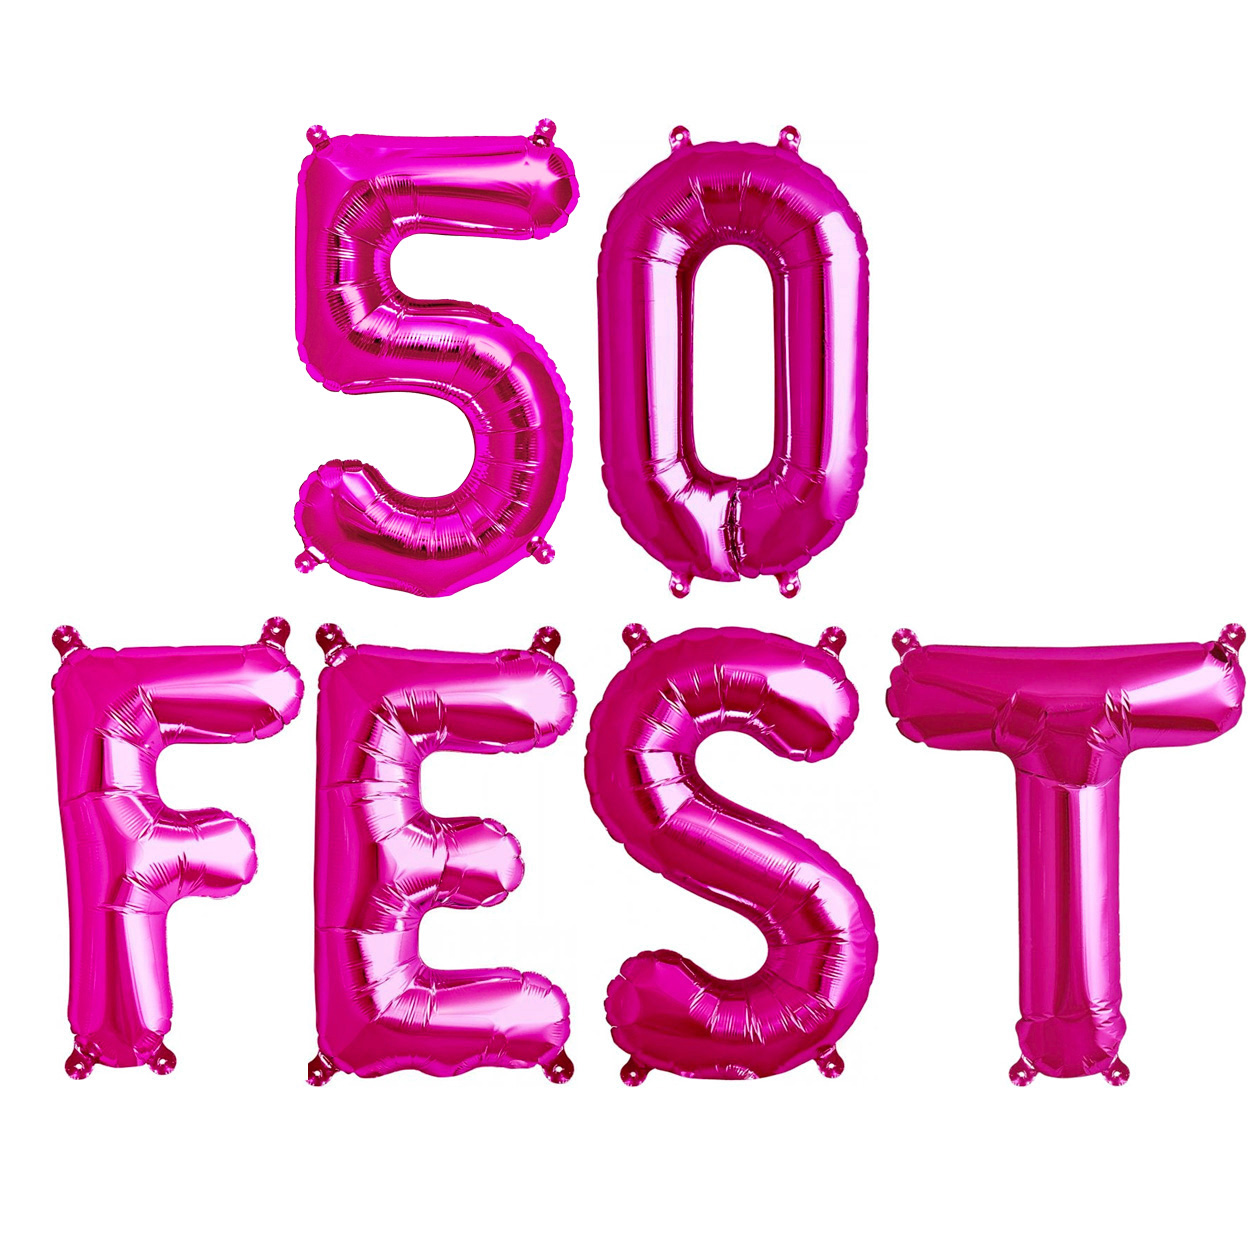 50fest 50th birthday party foil balloons pink